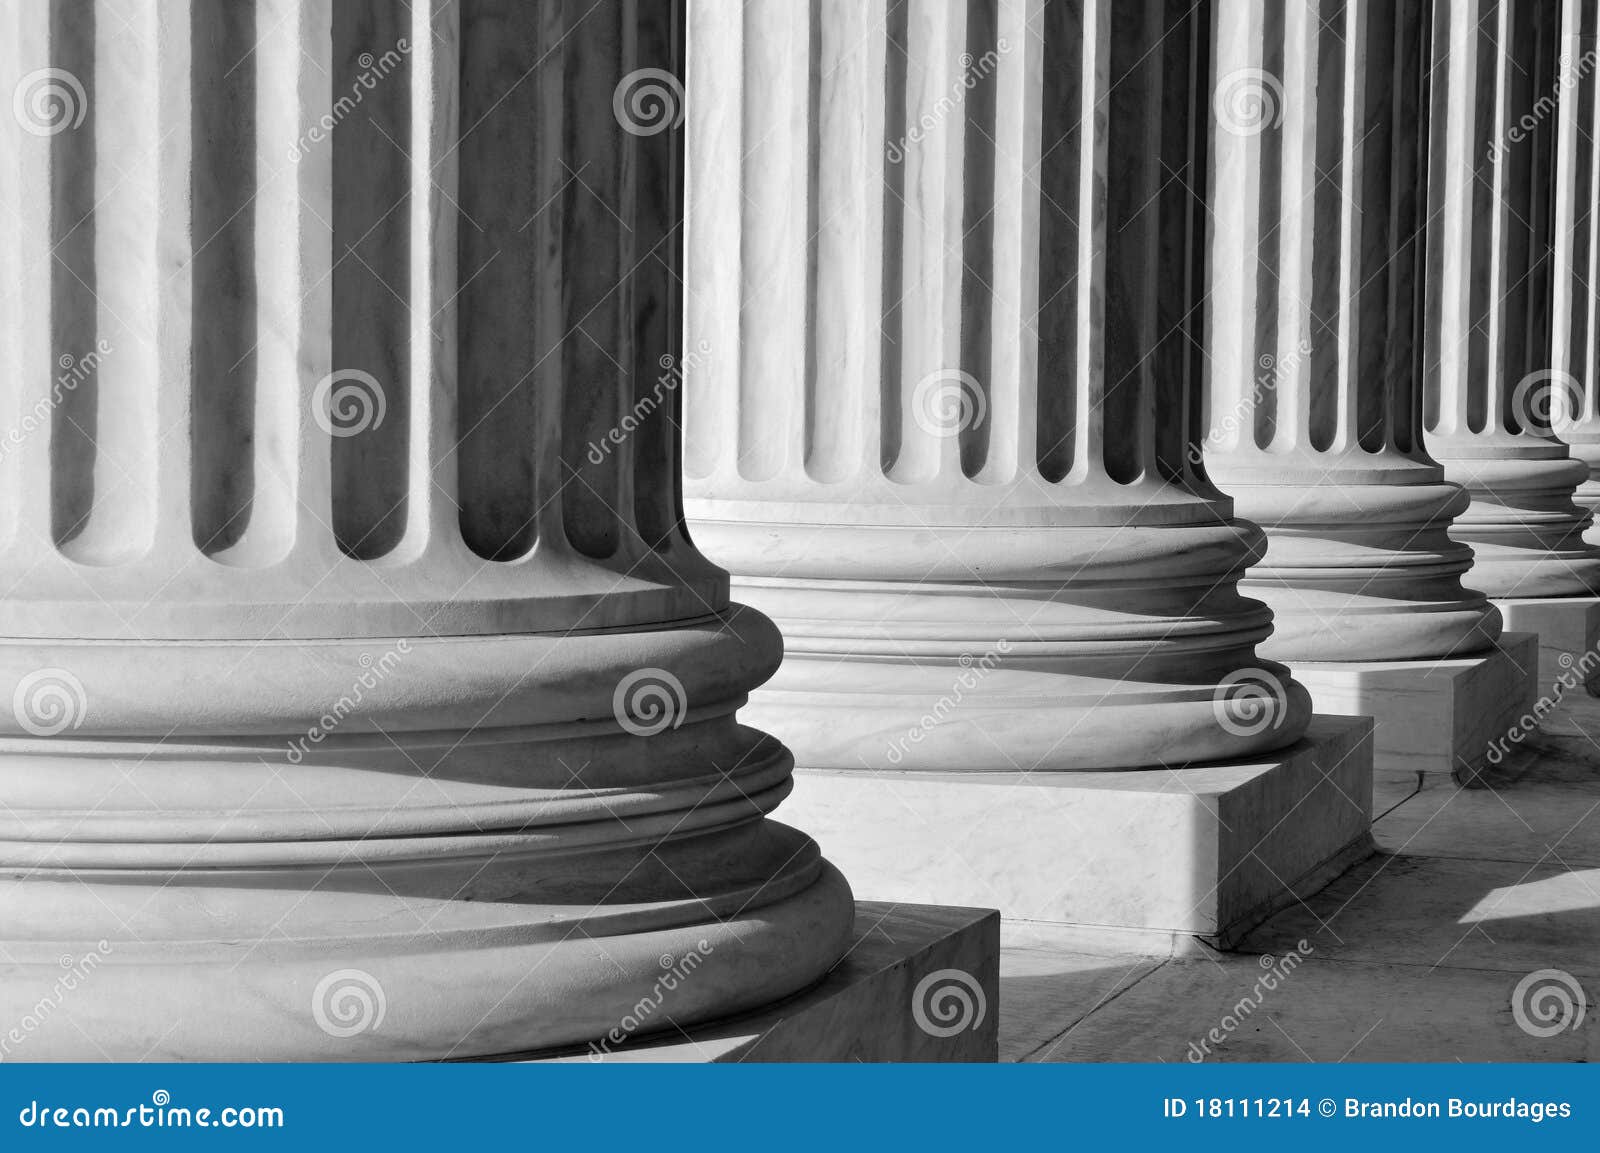 pillars of law and order